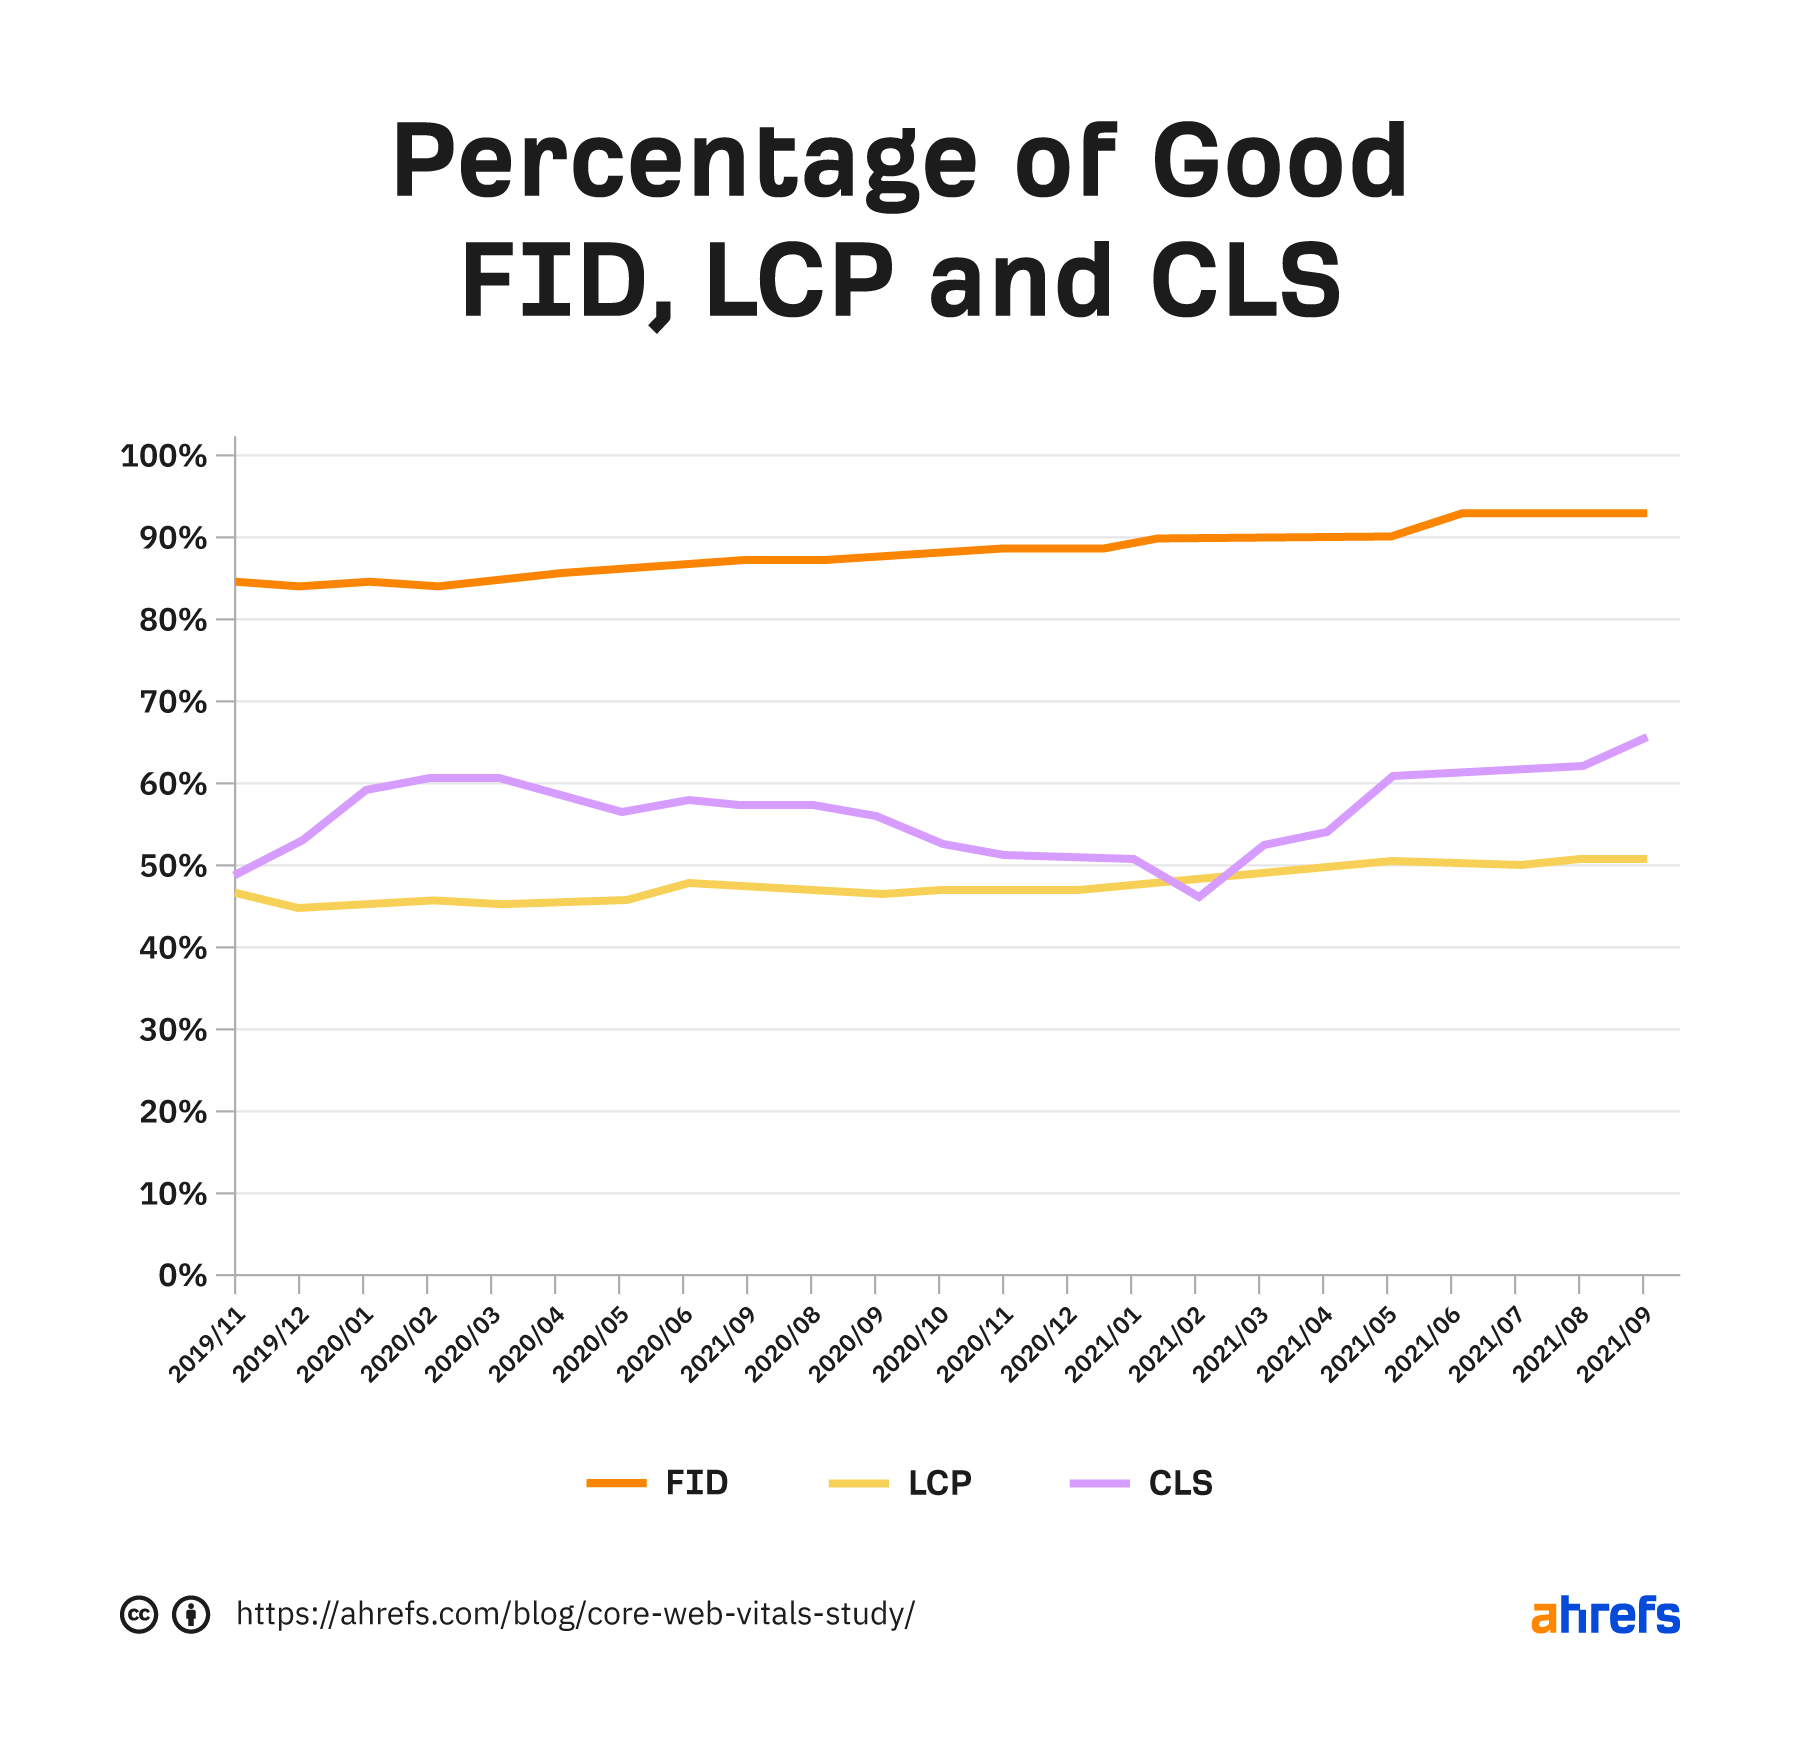 Chart showing the percentage of good FID, LCP and CLS over time